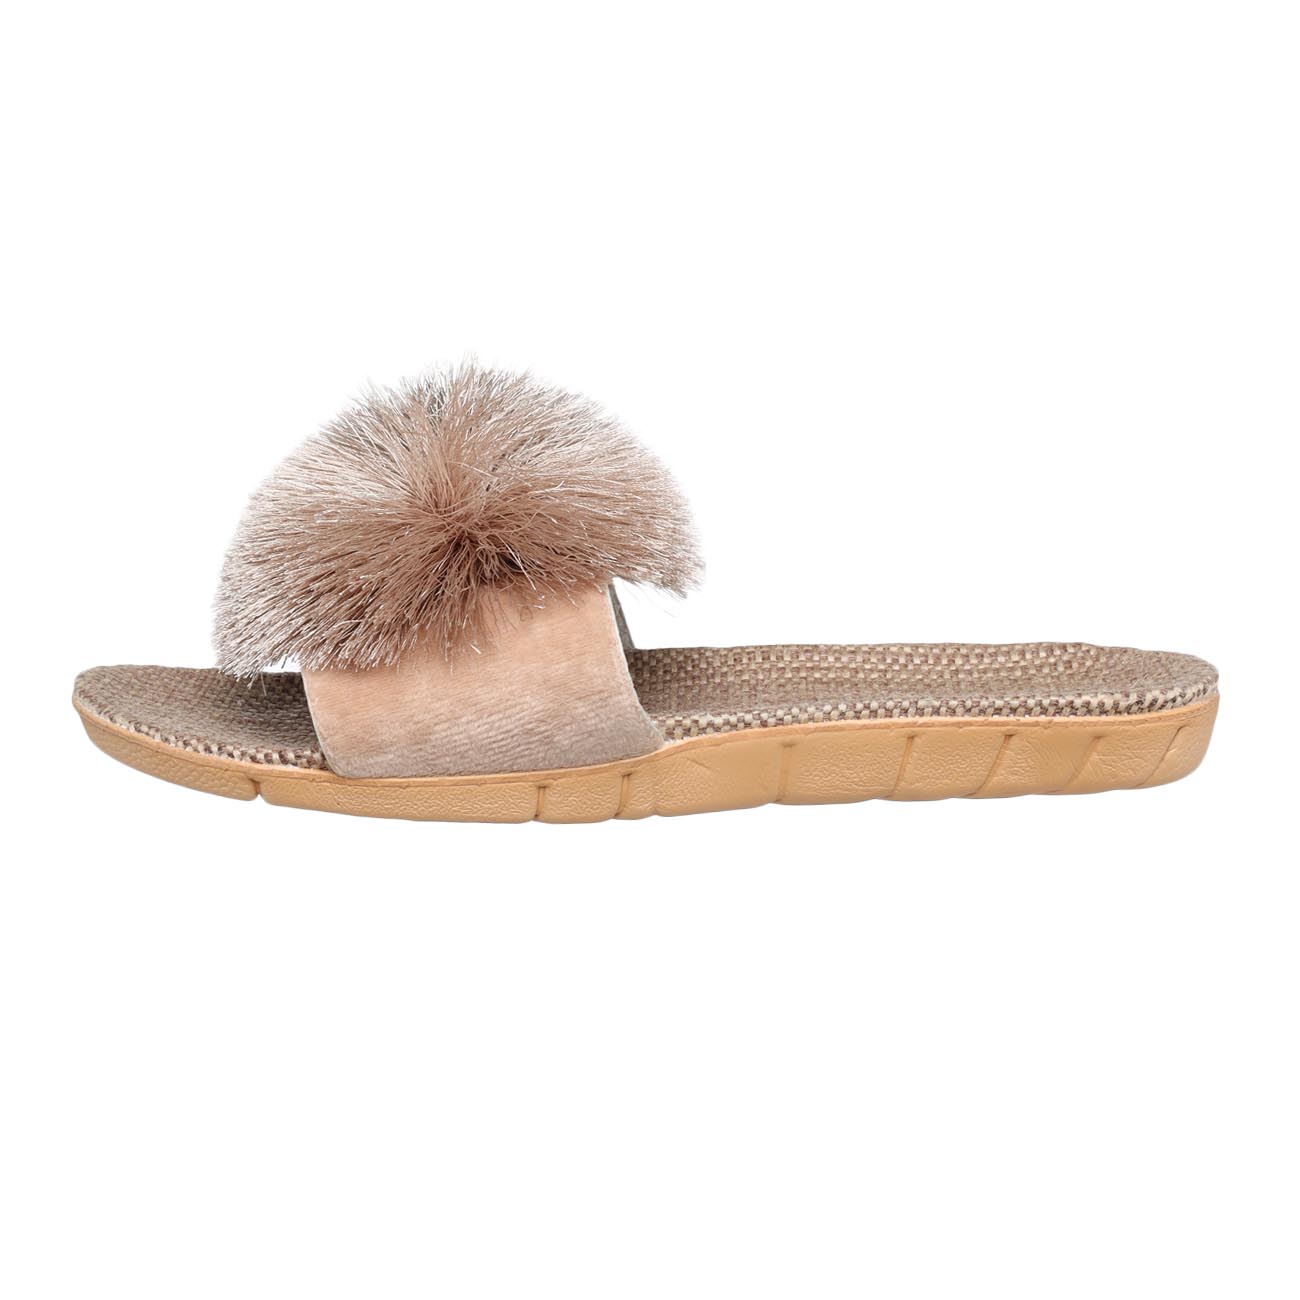 Slippers for women, home, p. 37-38, with pompom, polyester / linen, gray-brown, Pompon изображение № 4